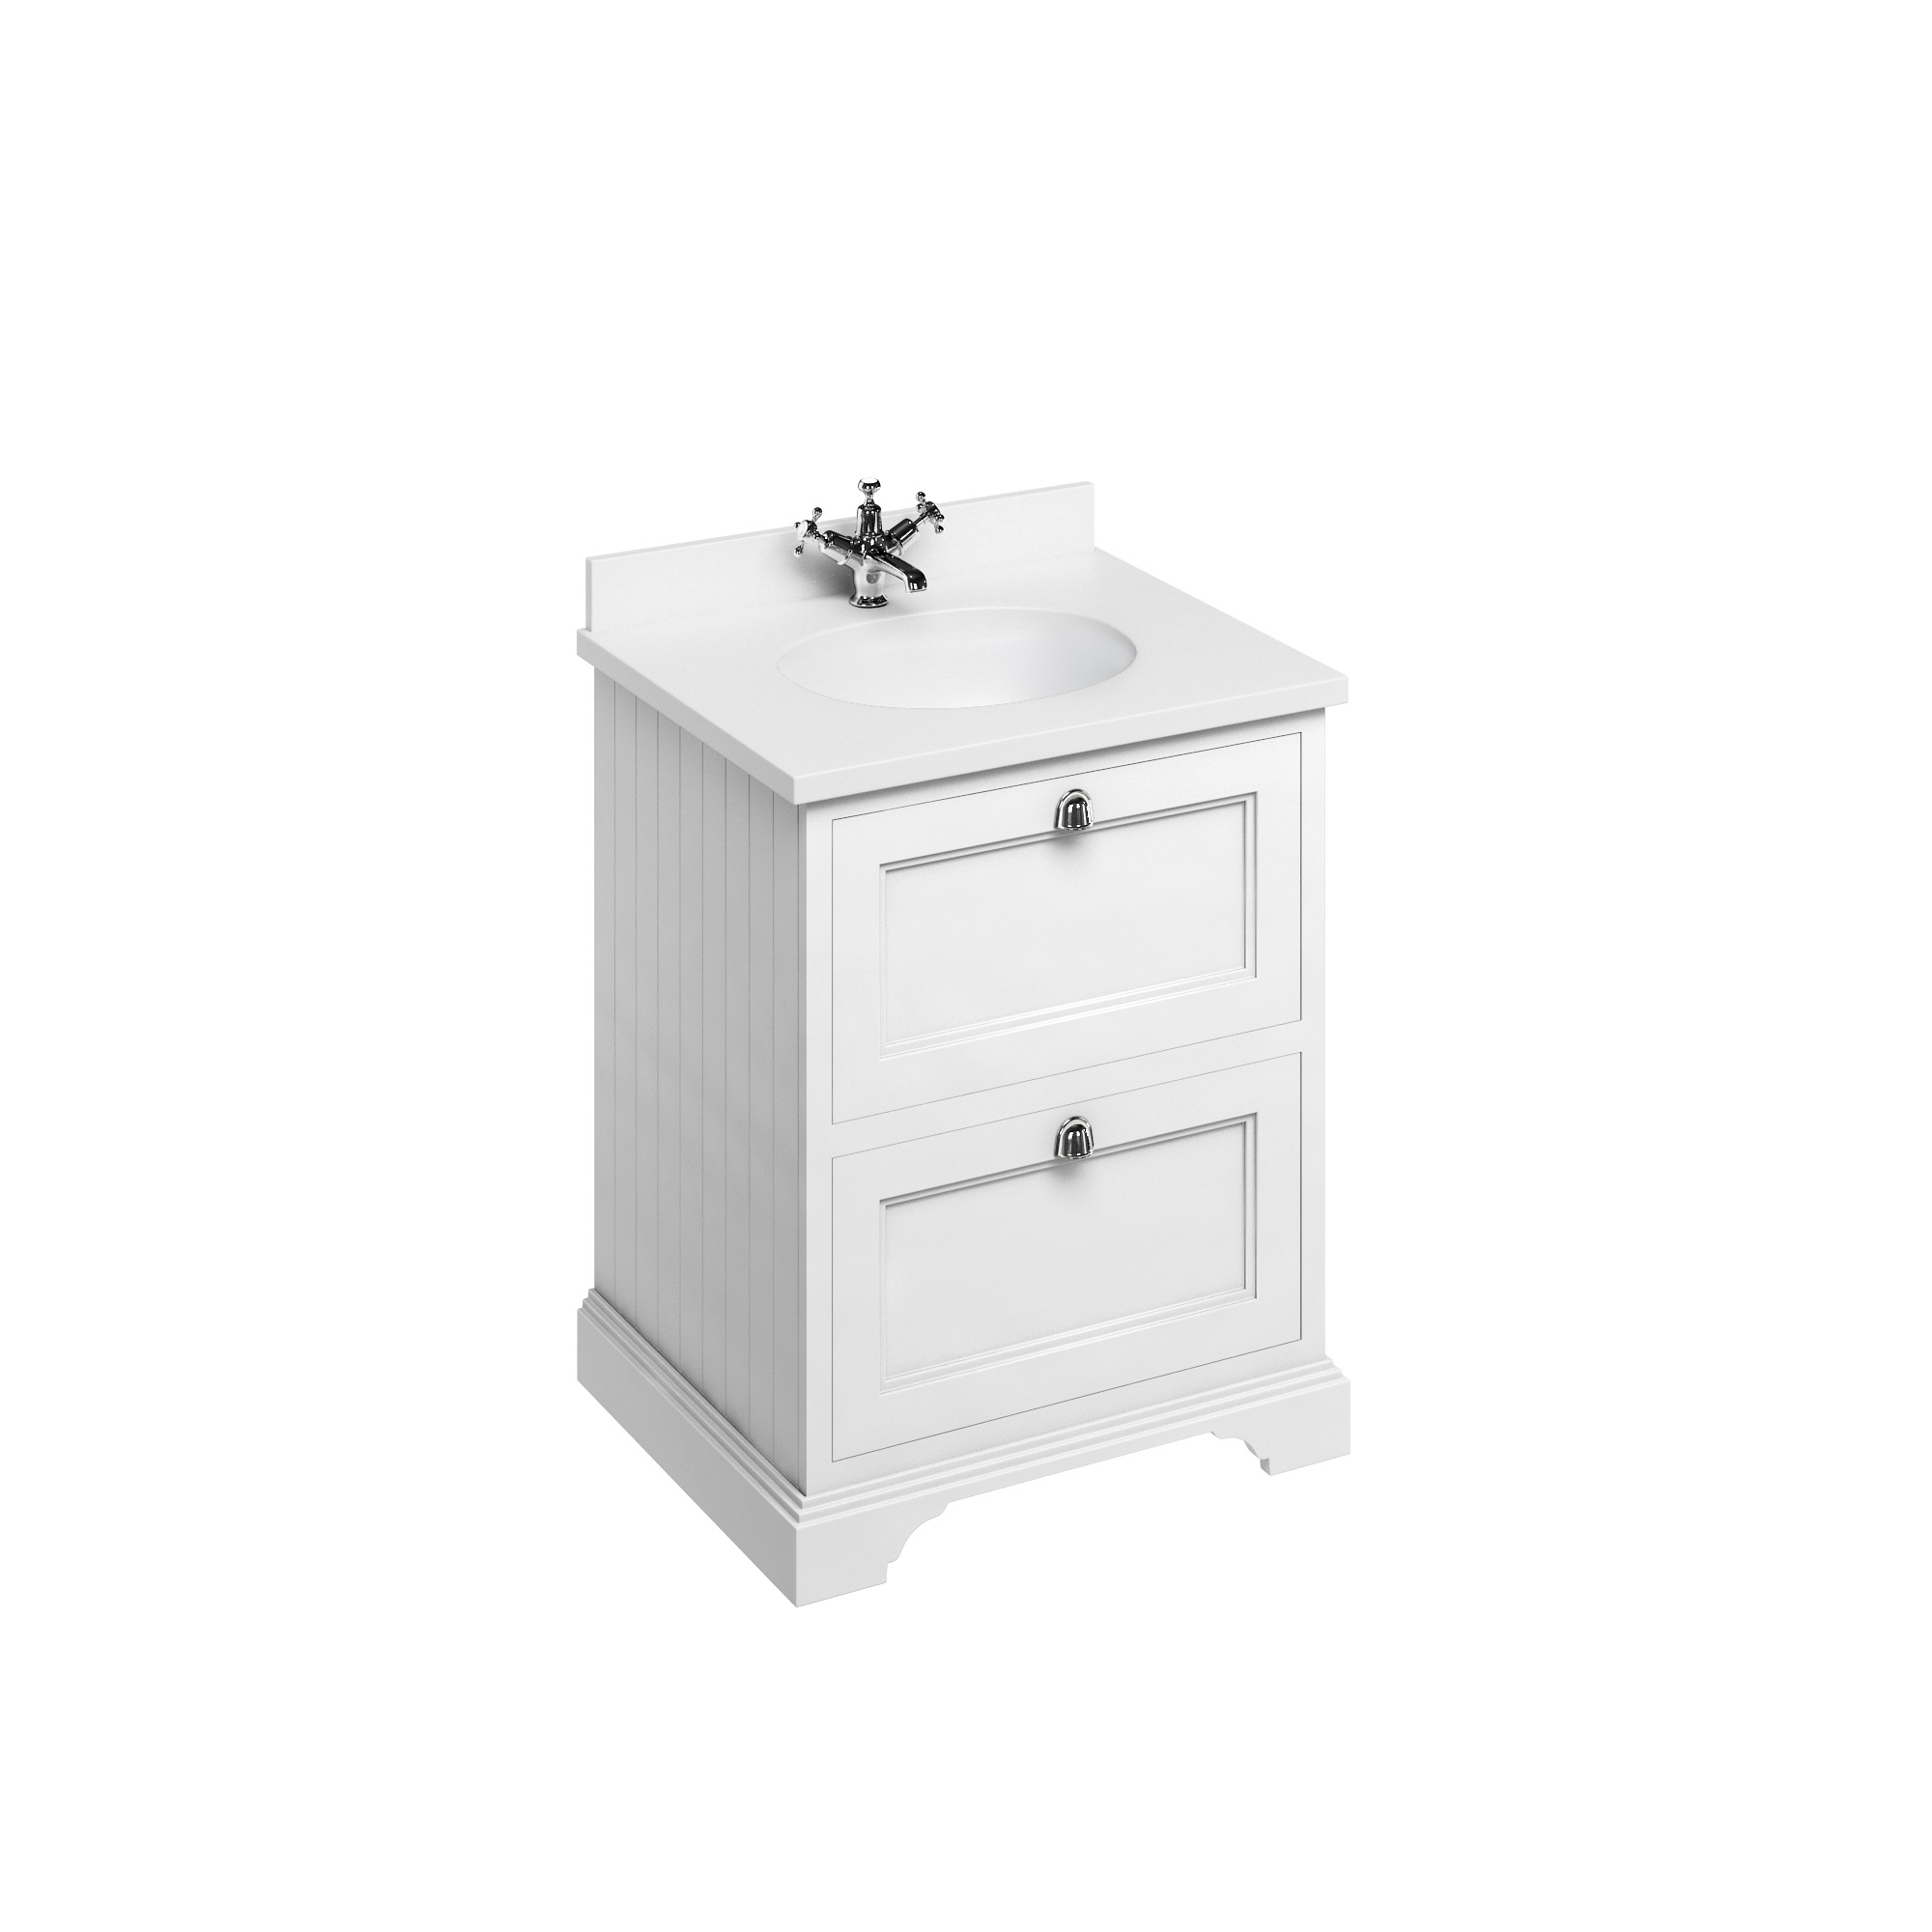 Freestanding 65 Vanity Unit with 2 drawers - Matt White and Minerva white worktop with integrated white basin